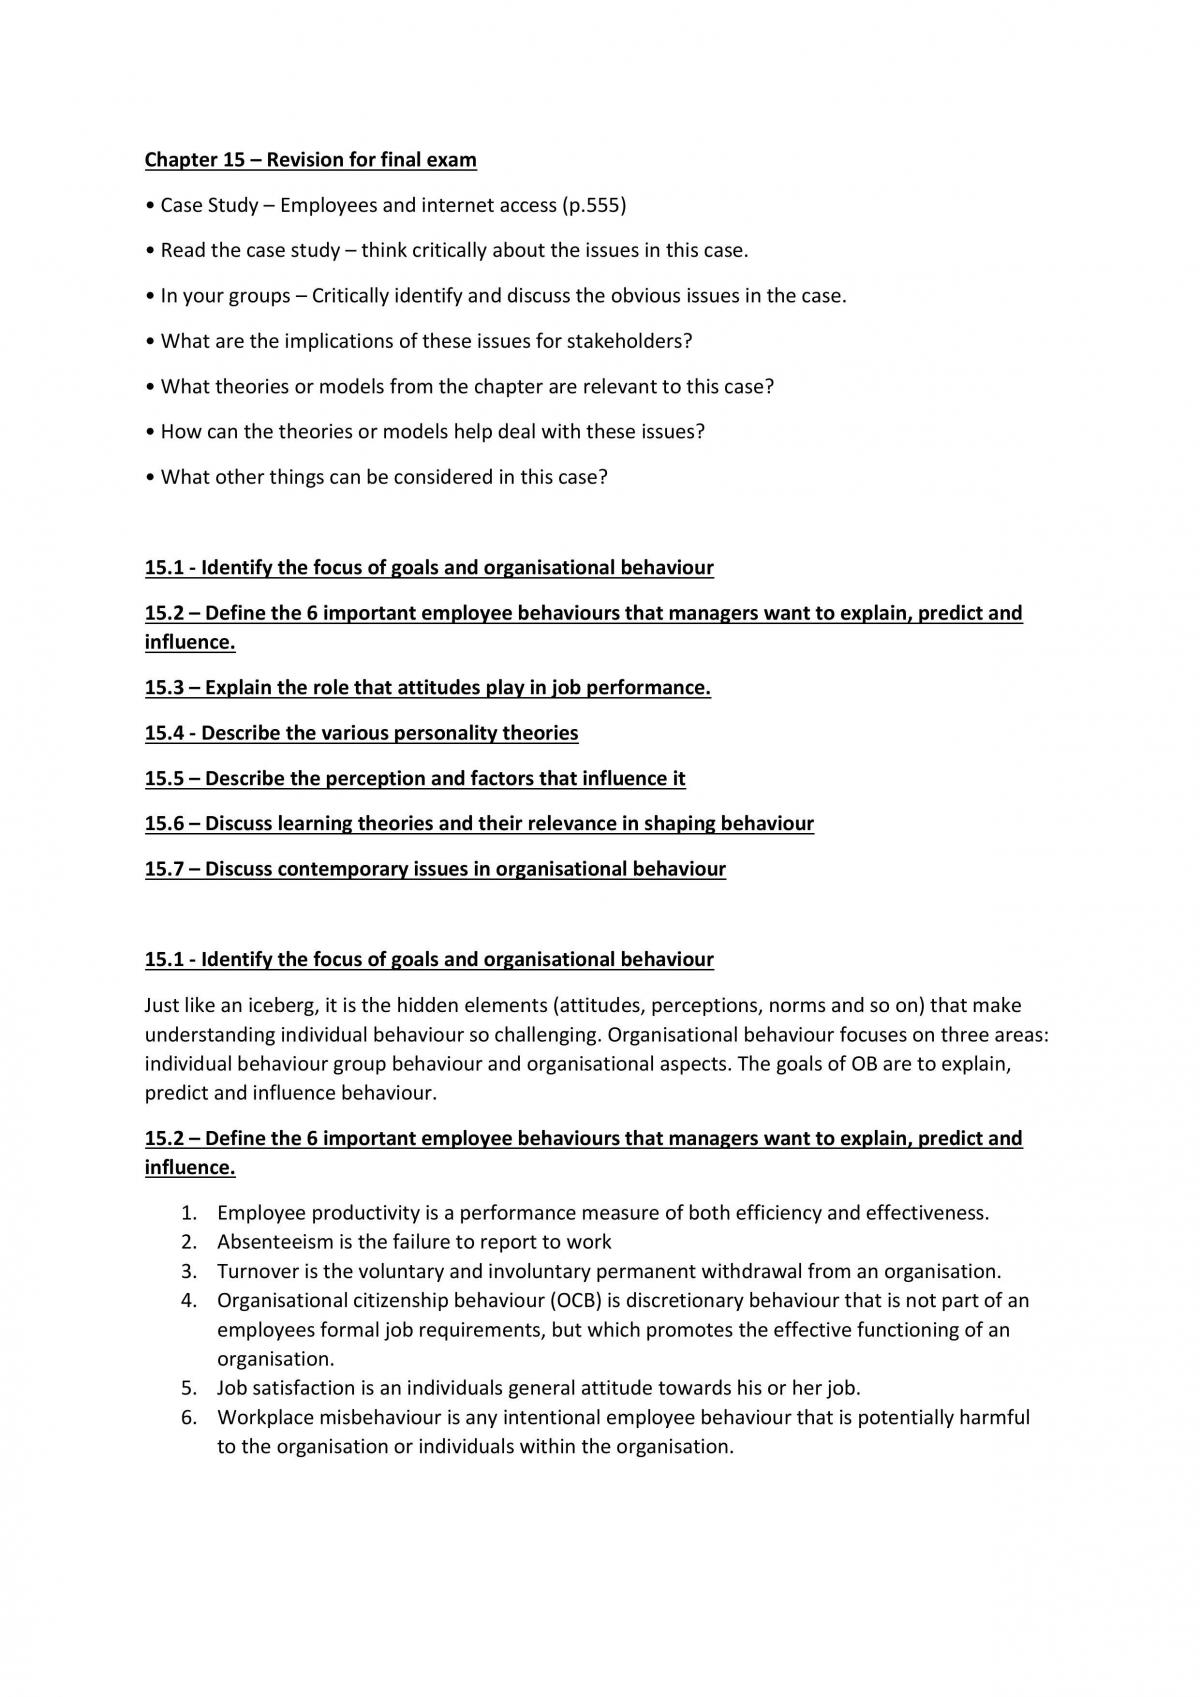 Enterprise Leadership Study Notes for Final Exam - Page 19